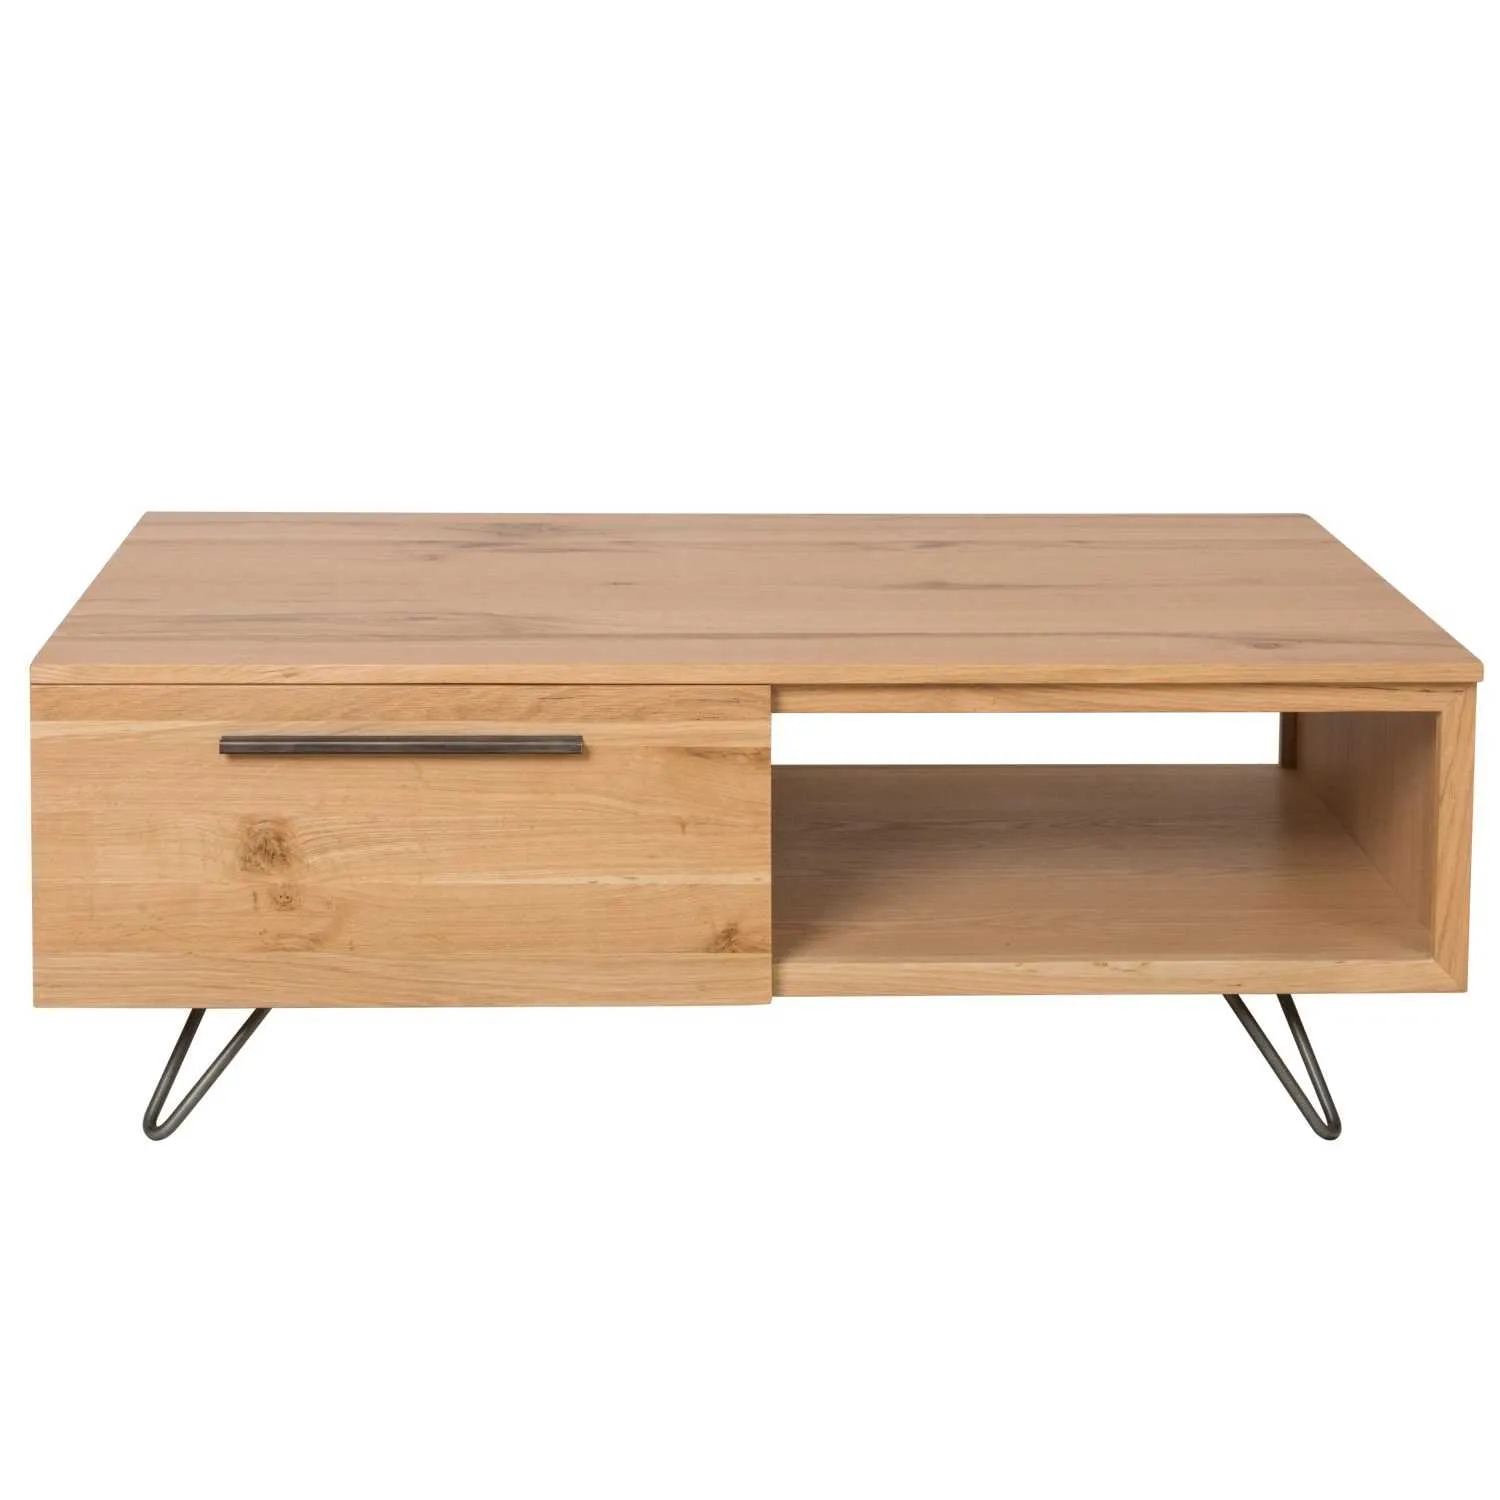 Industrial Style Timber And Metal 2 Drawer Living Room Coffee Table With Open Shelf And Hairpin Legs 45 x 120cm